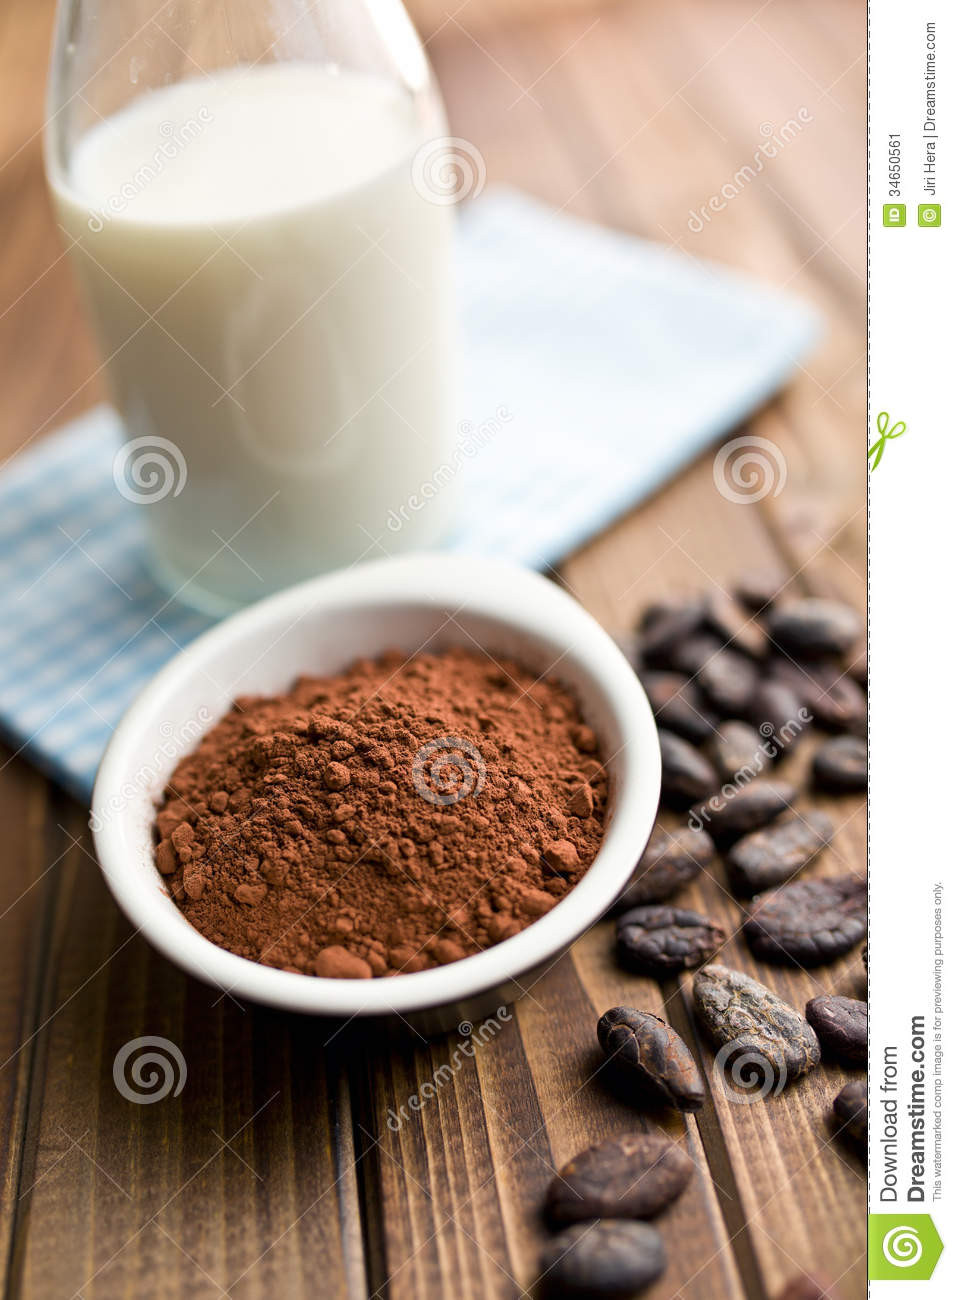 Dairy Free Cocoa Powder
 Cocoa powder with milk stock image Image of brown powder